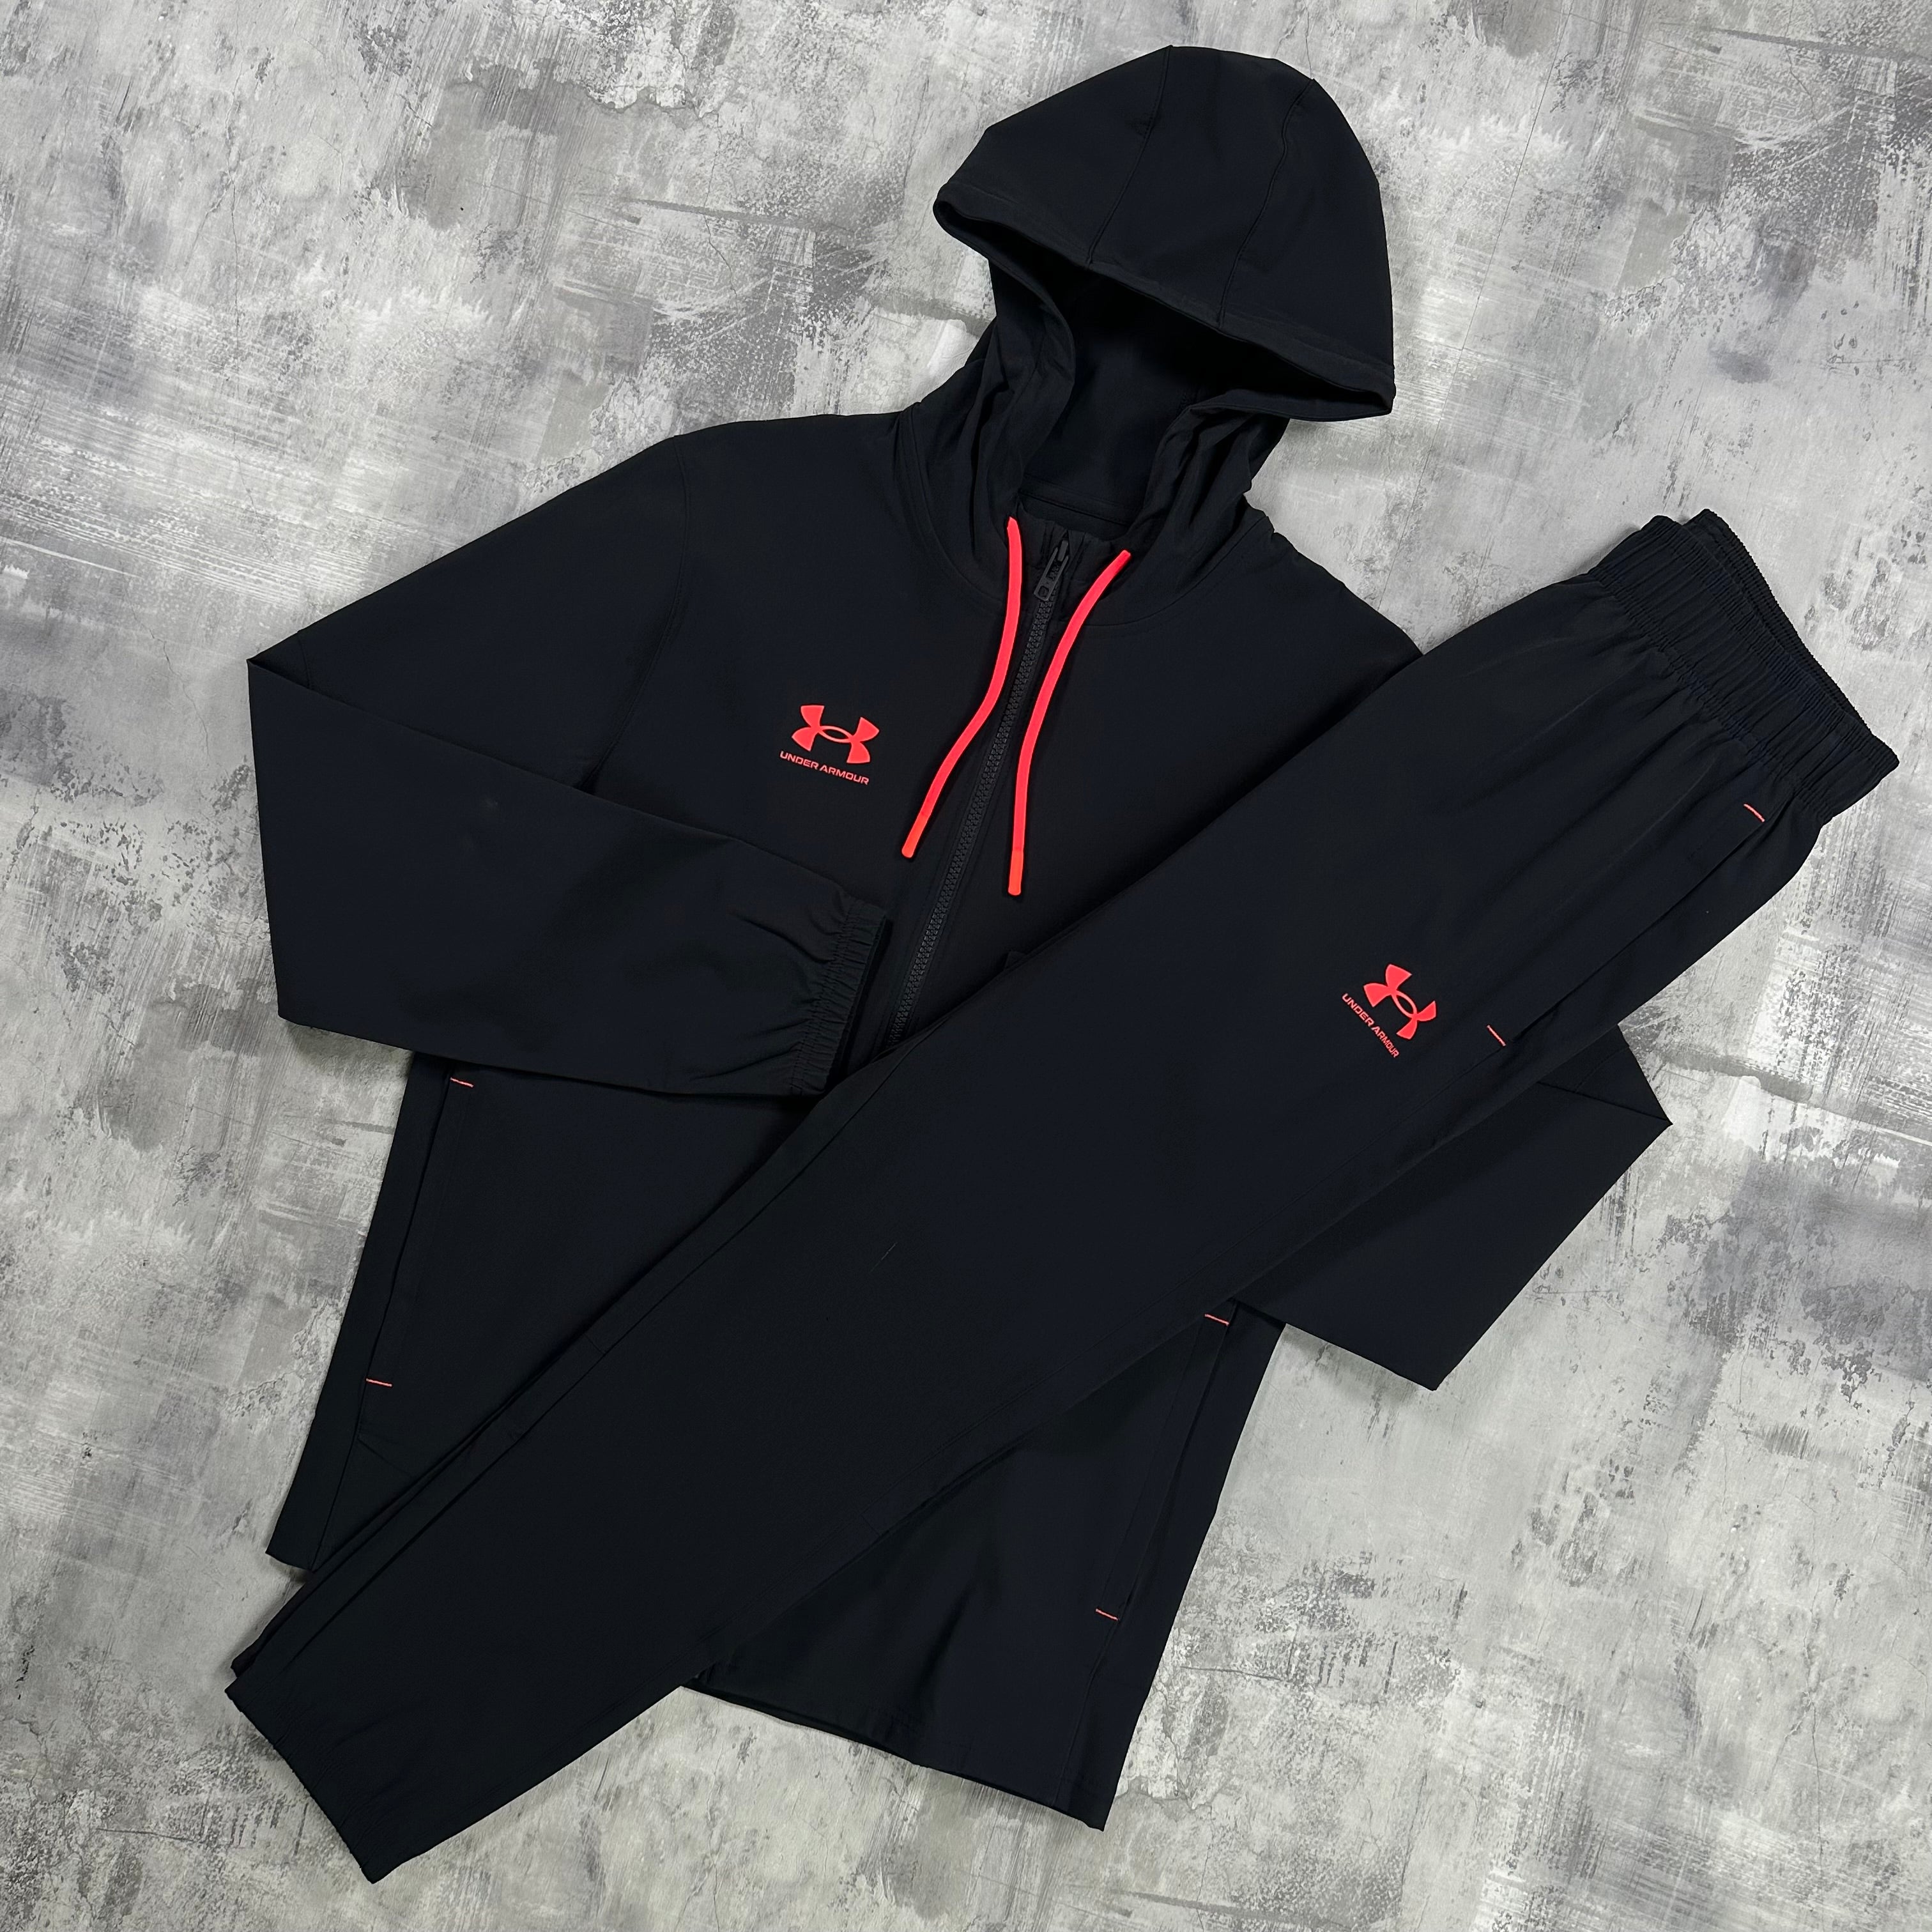 Under Armour Pro tracksuit Black / Red - jacket & trousers